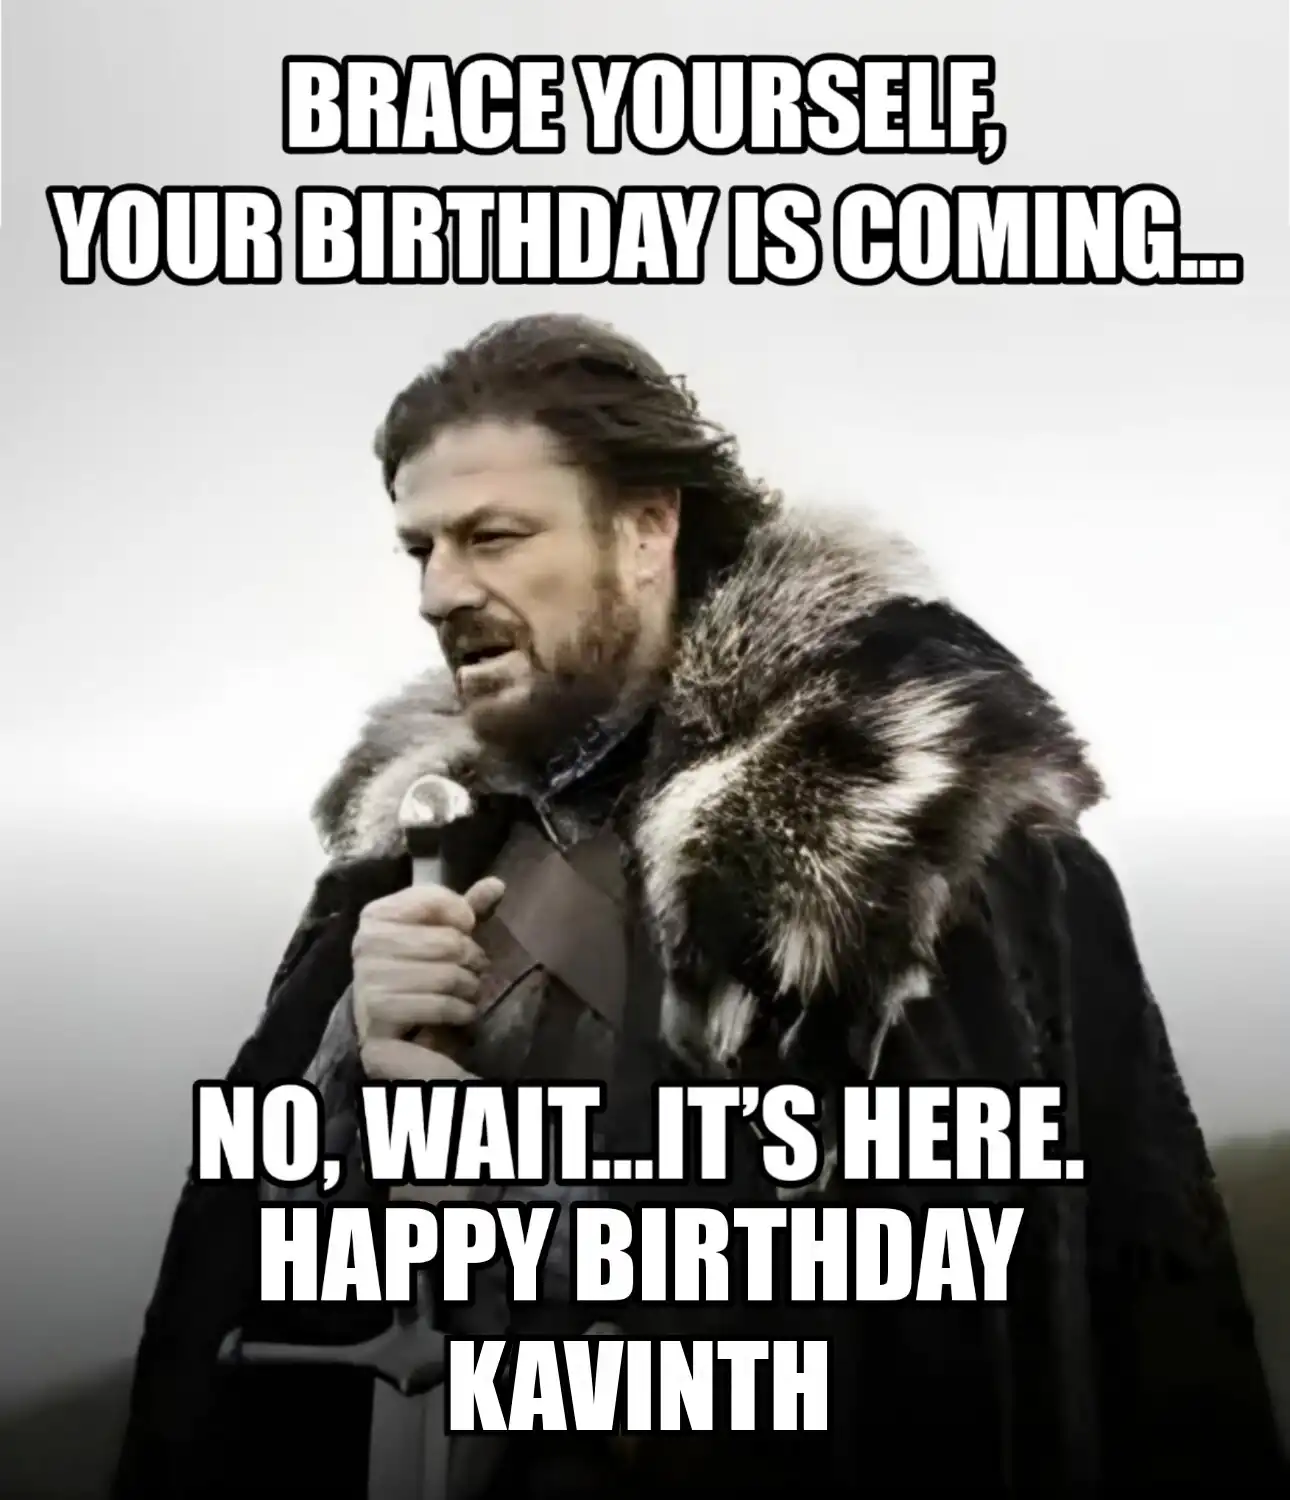 Happy Birthday Kavinth Brace Yourself Your Birthday Is Coming Meme